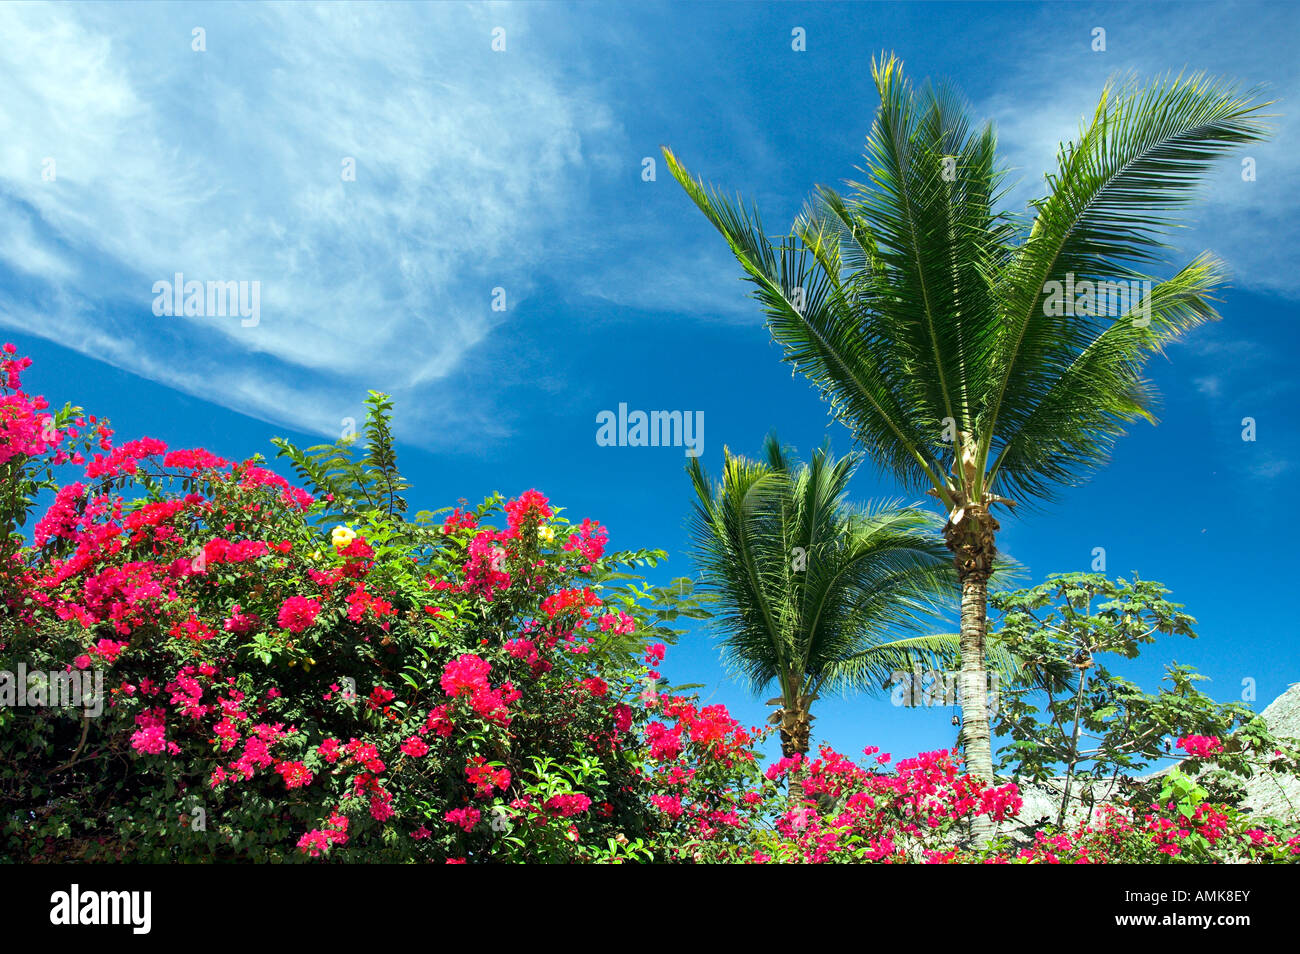 Tropical foliage of palms and bougainvillea flowers on Banderas Bay south of Puerto Vallarta Mexico Stock Photo